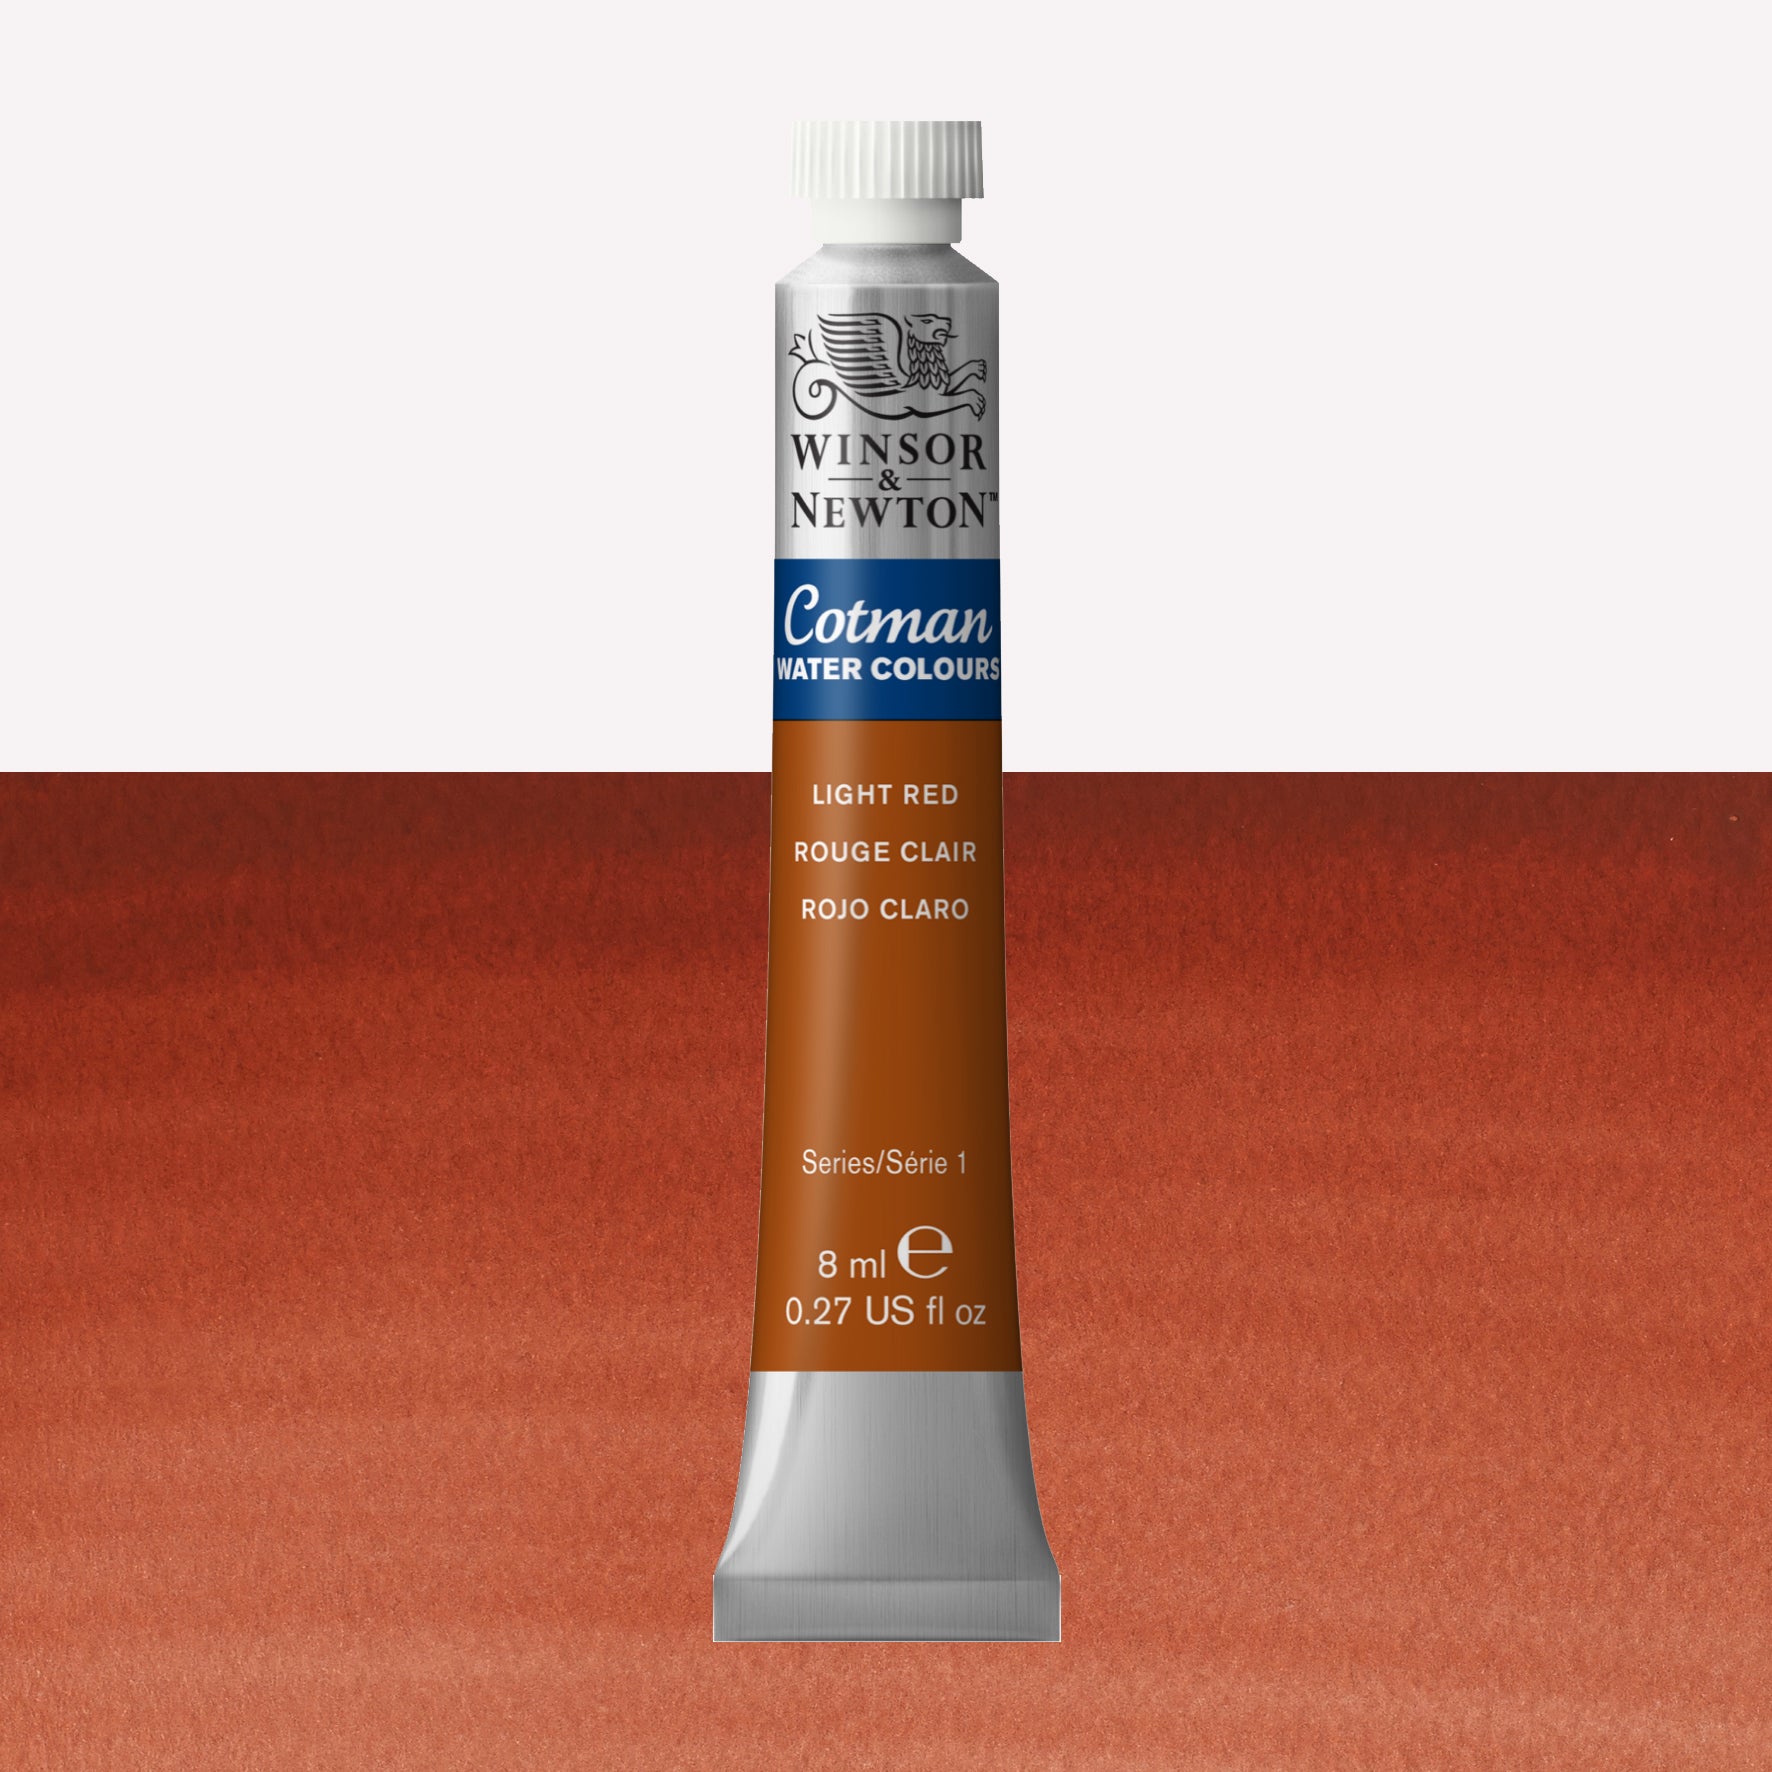 Winsor & Newton Cotman watercolour paint packaged in 8ml silver tube with a white lid in the shade Light Red over a highly pigmented colour swatch.